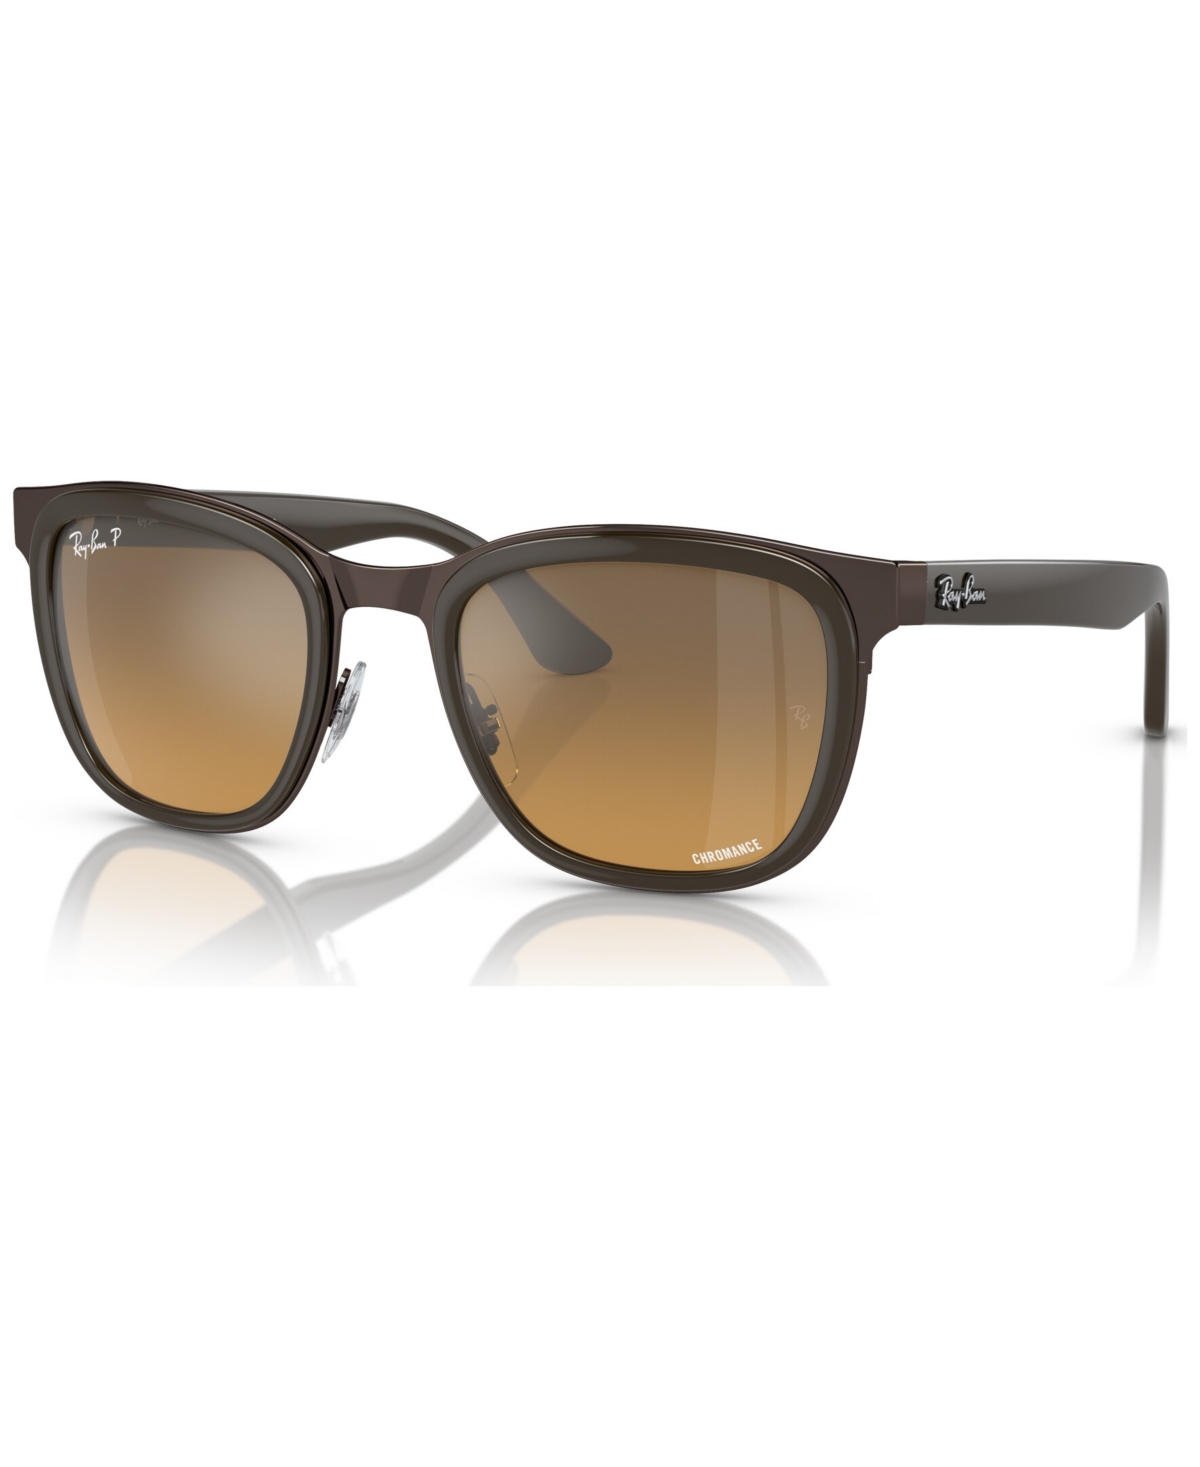 Shop Ray Ban Unisex Polarized Sunglasses, Clyde In Brown On Copper